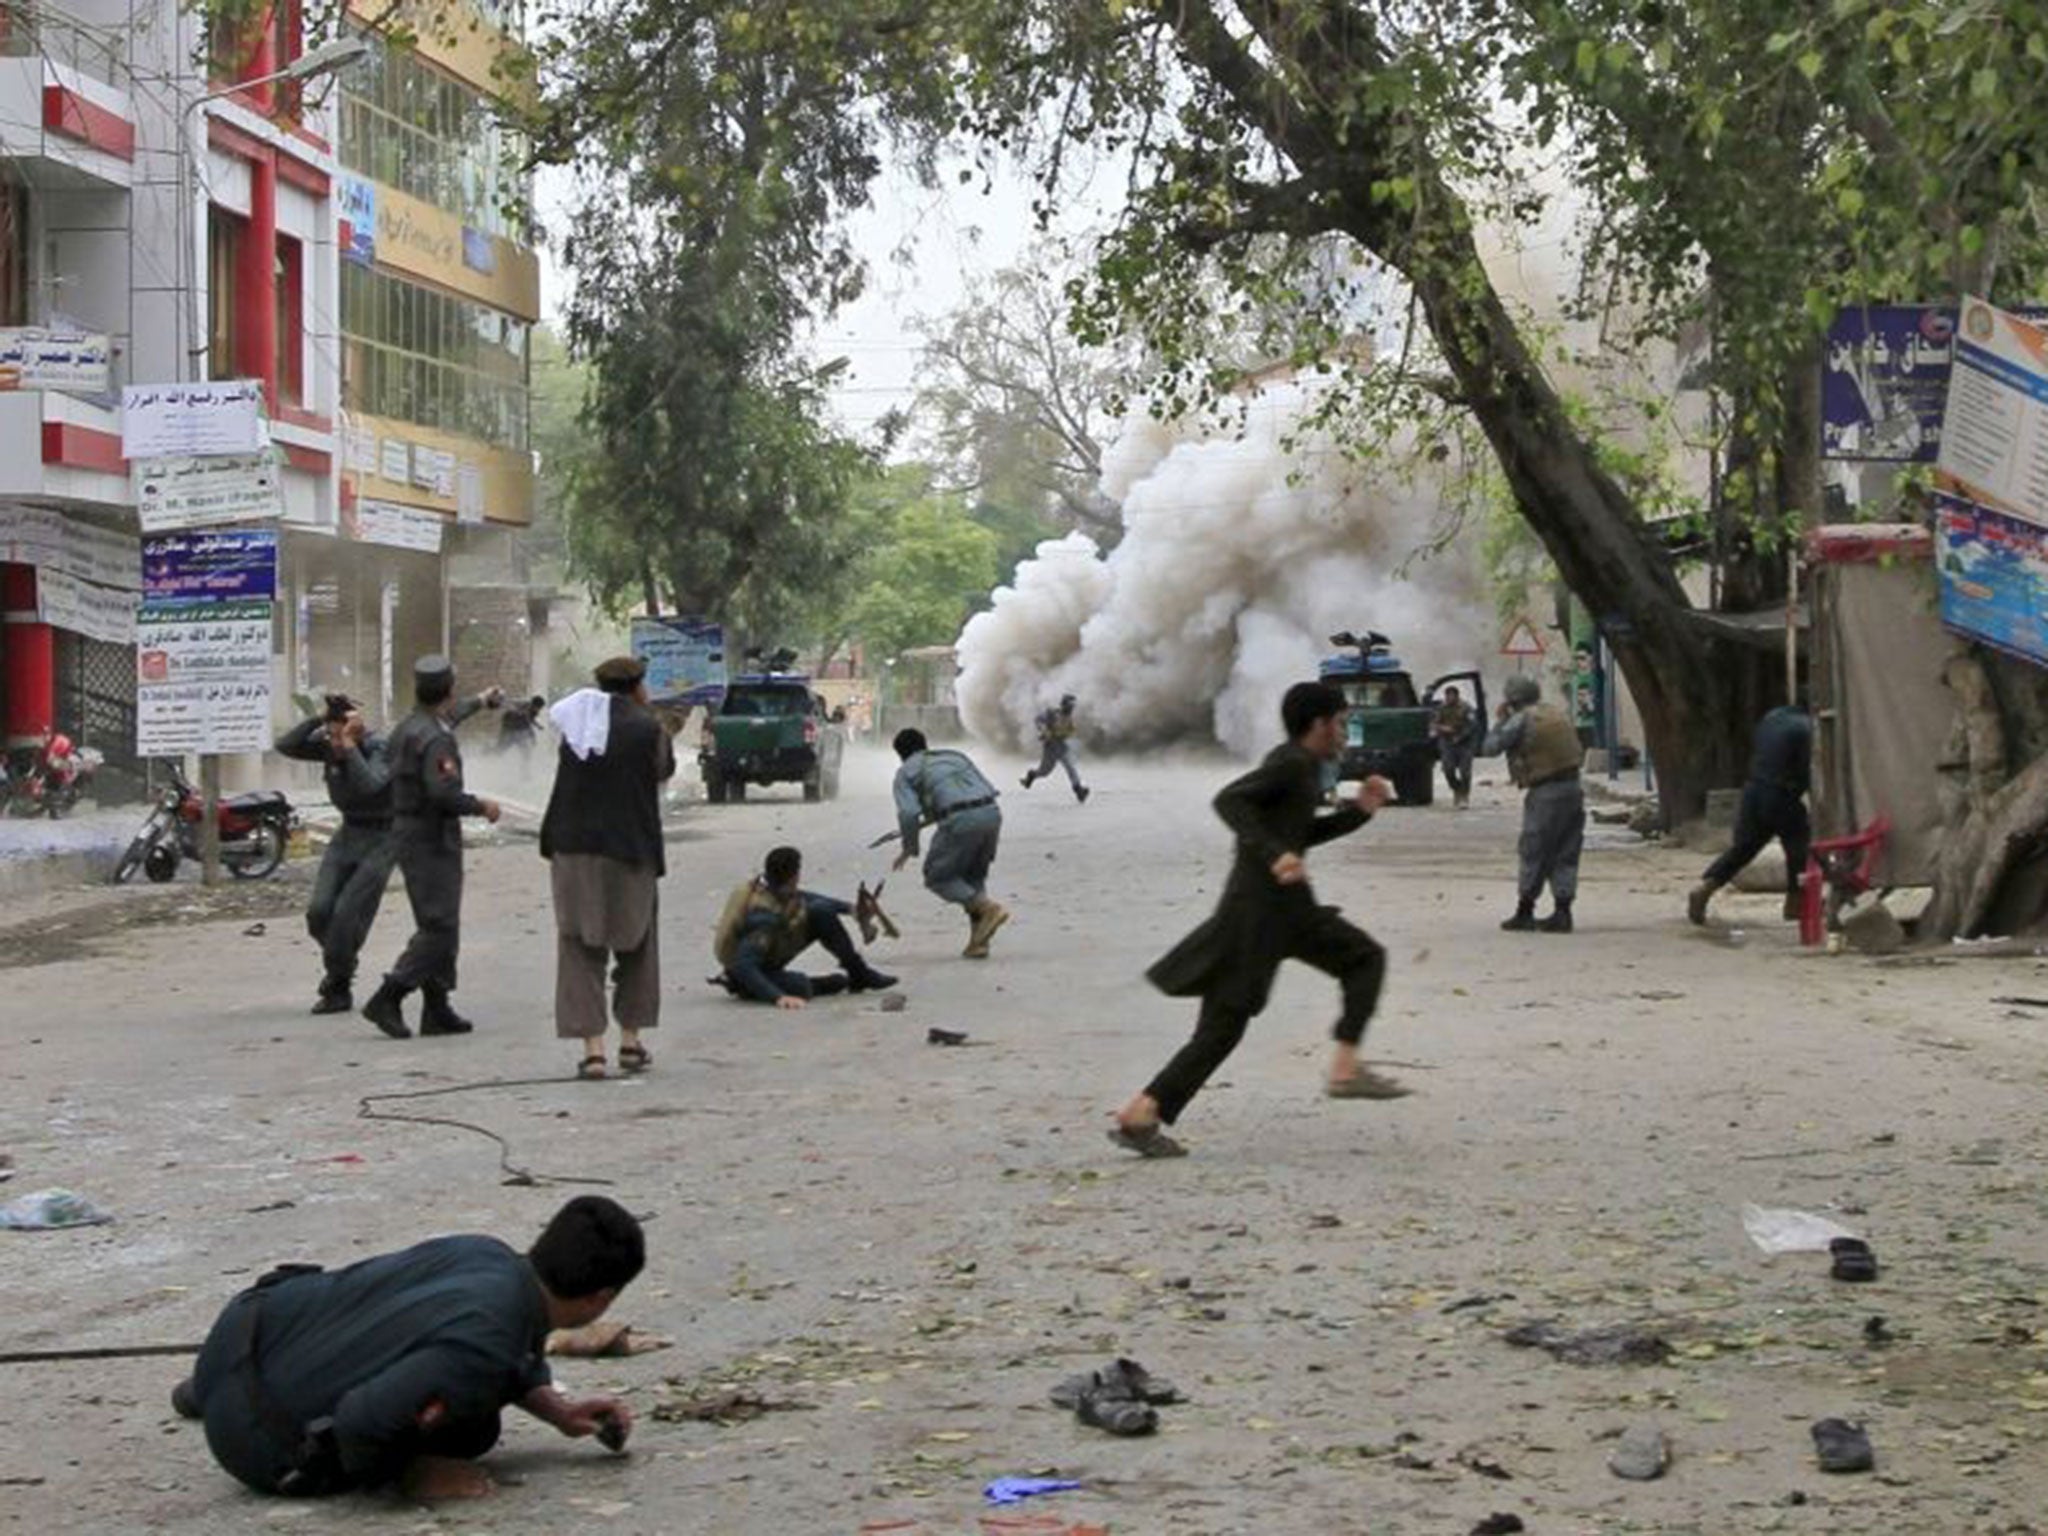 People run for cover after an explosion in Jalalabad on April 18, 2015